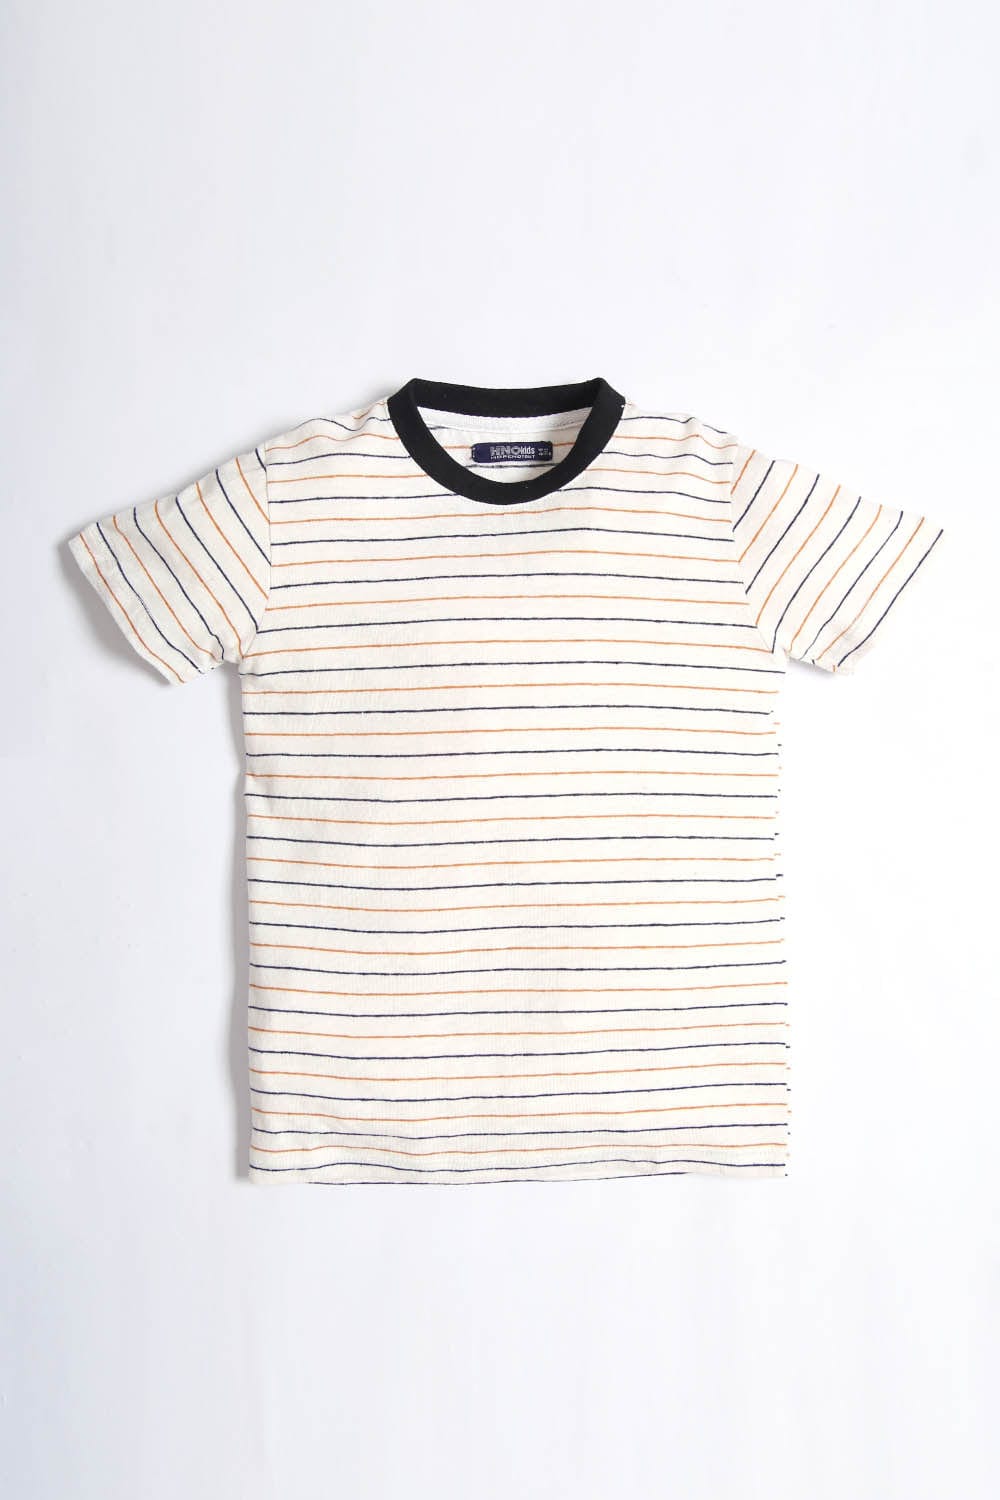 Hope Not Out by Shahid Afridi Boys Knit T-Shirt Striped  T-shirt